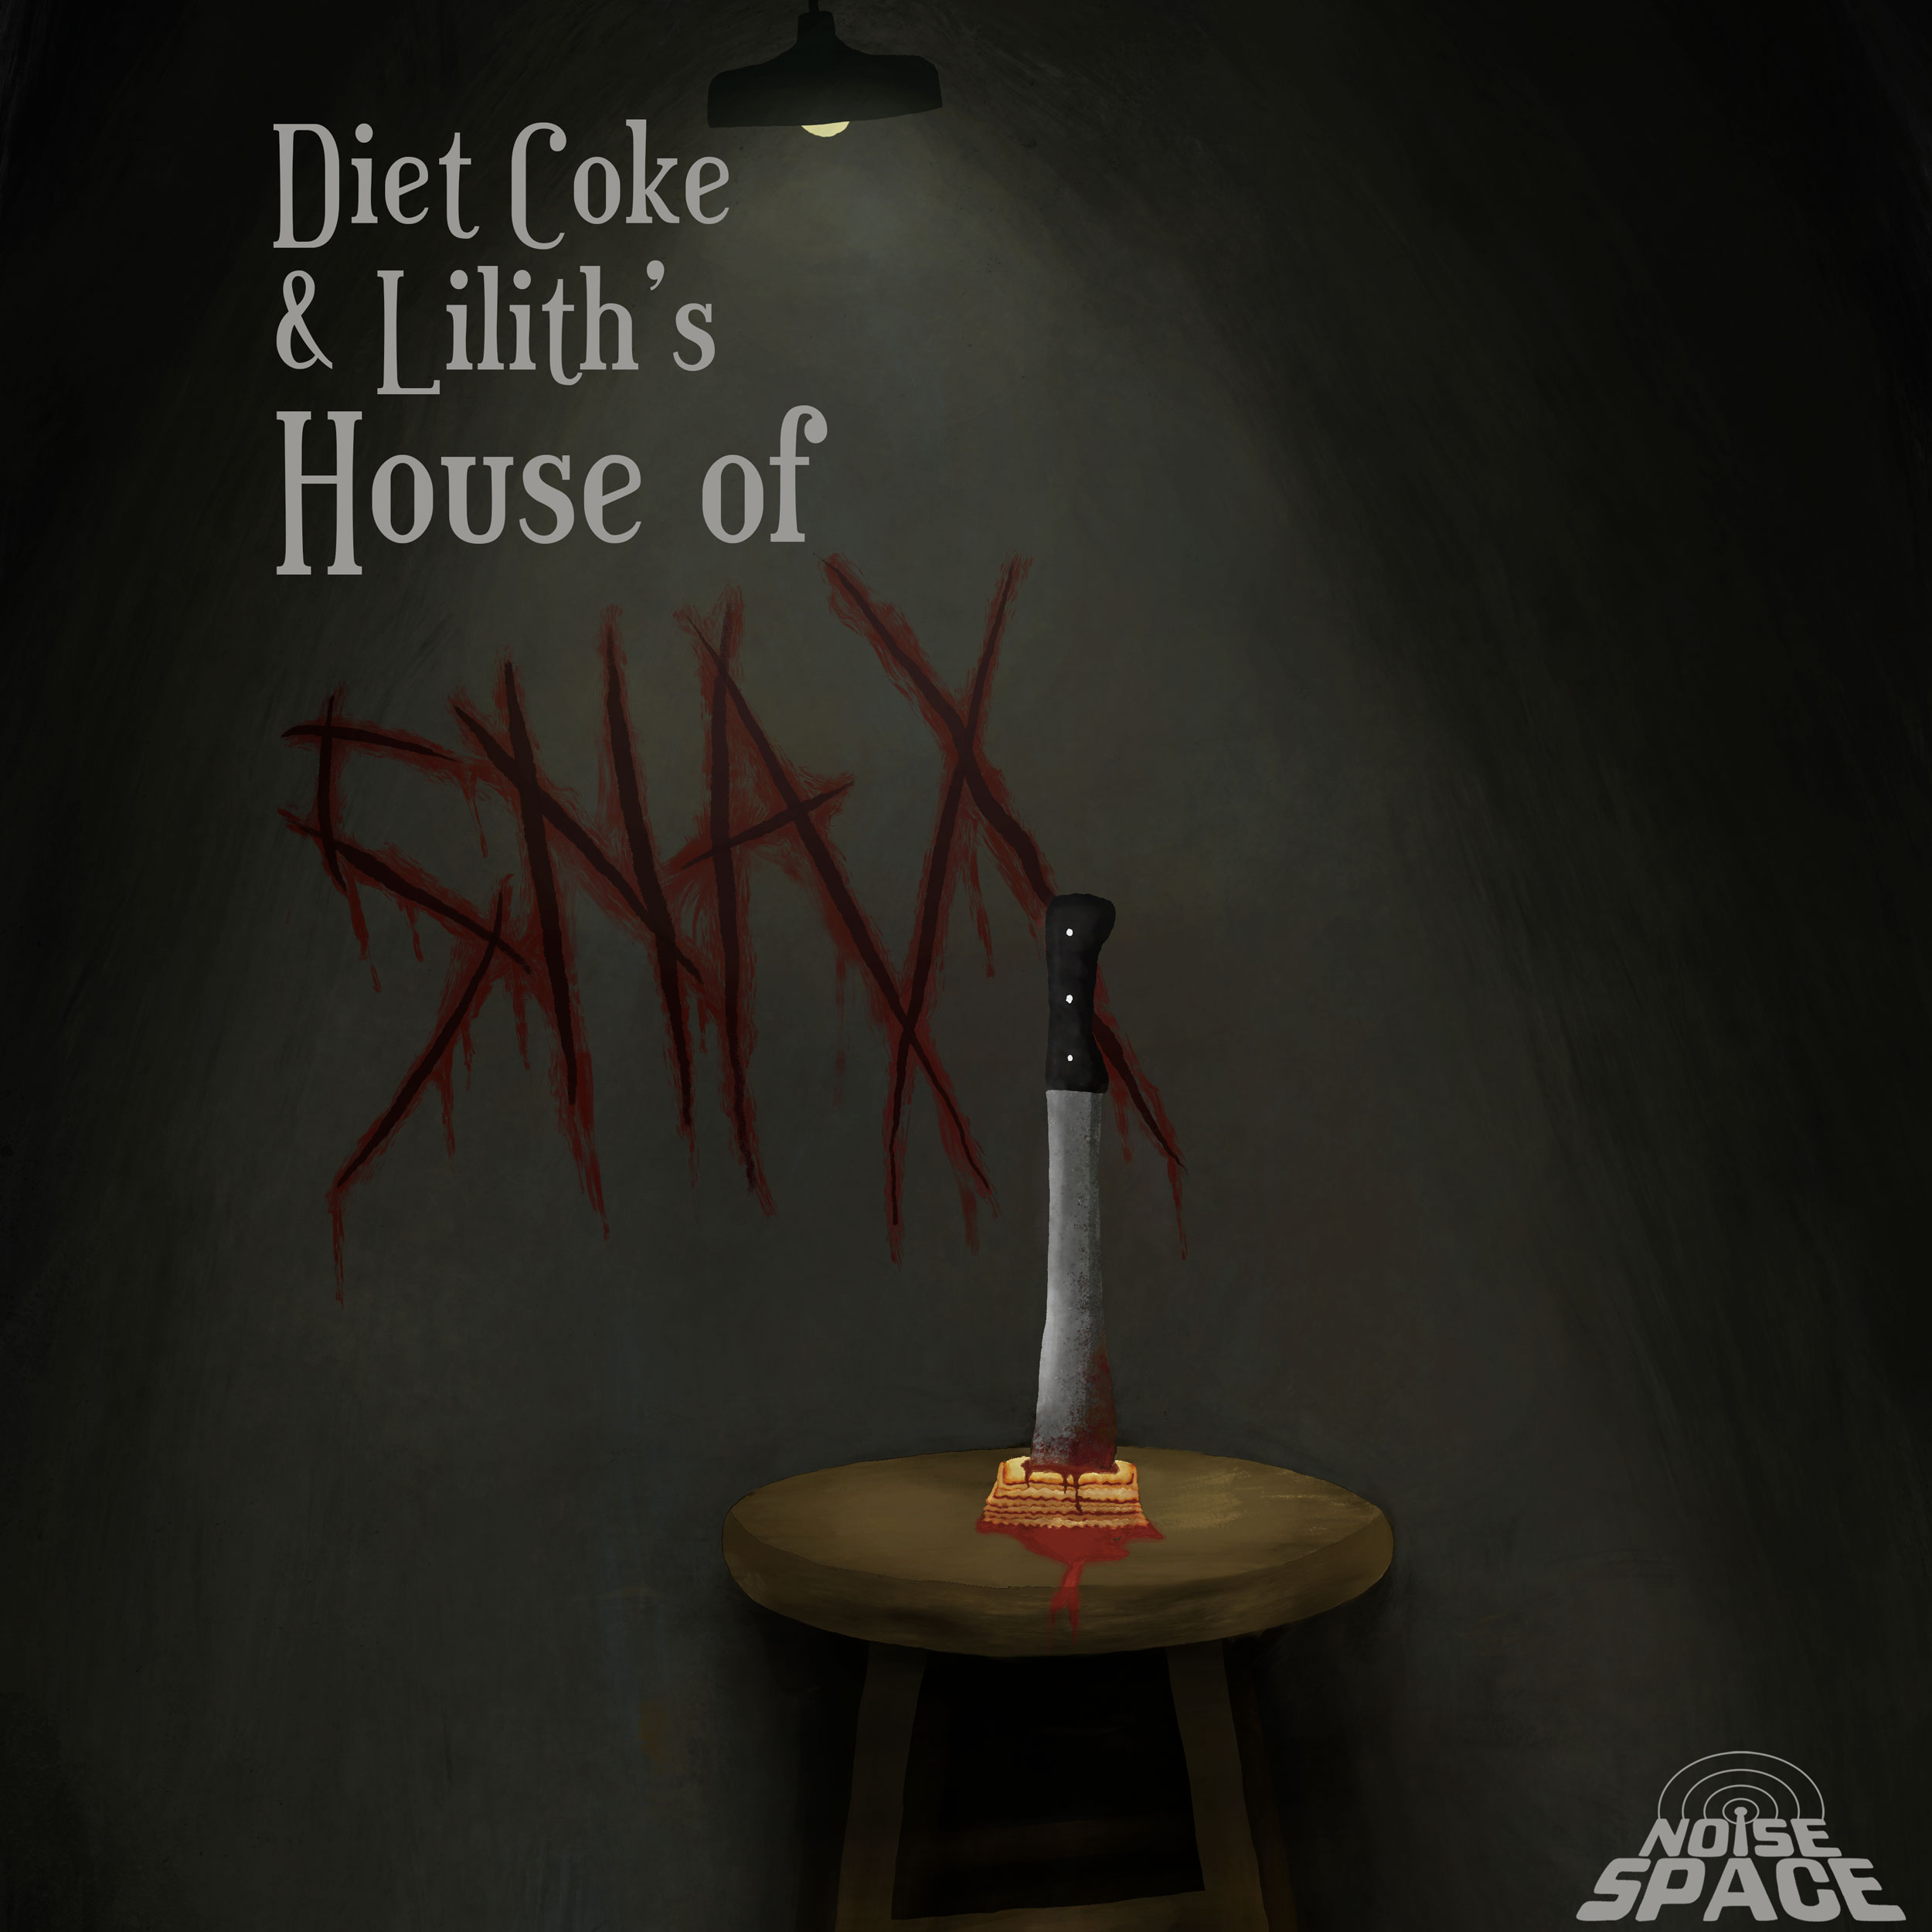 Diet Coke and Lilith's House of Snax